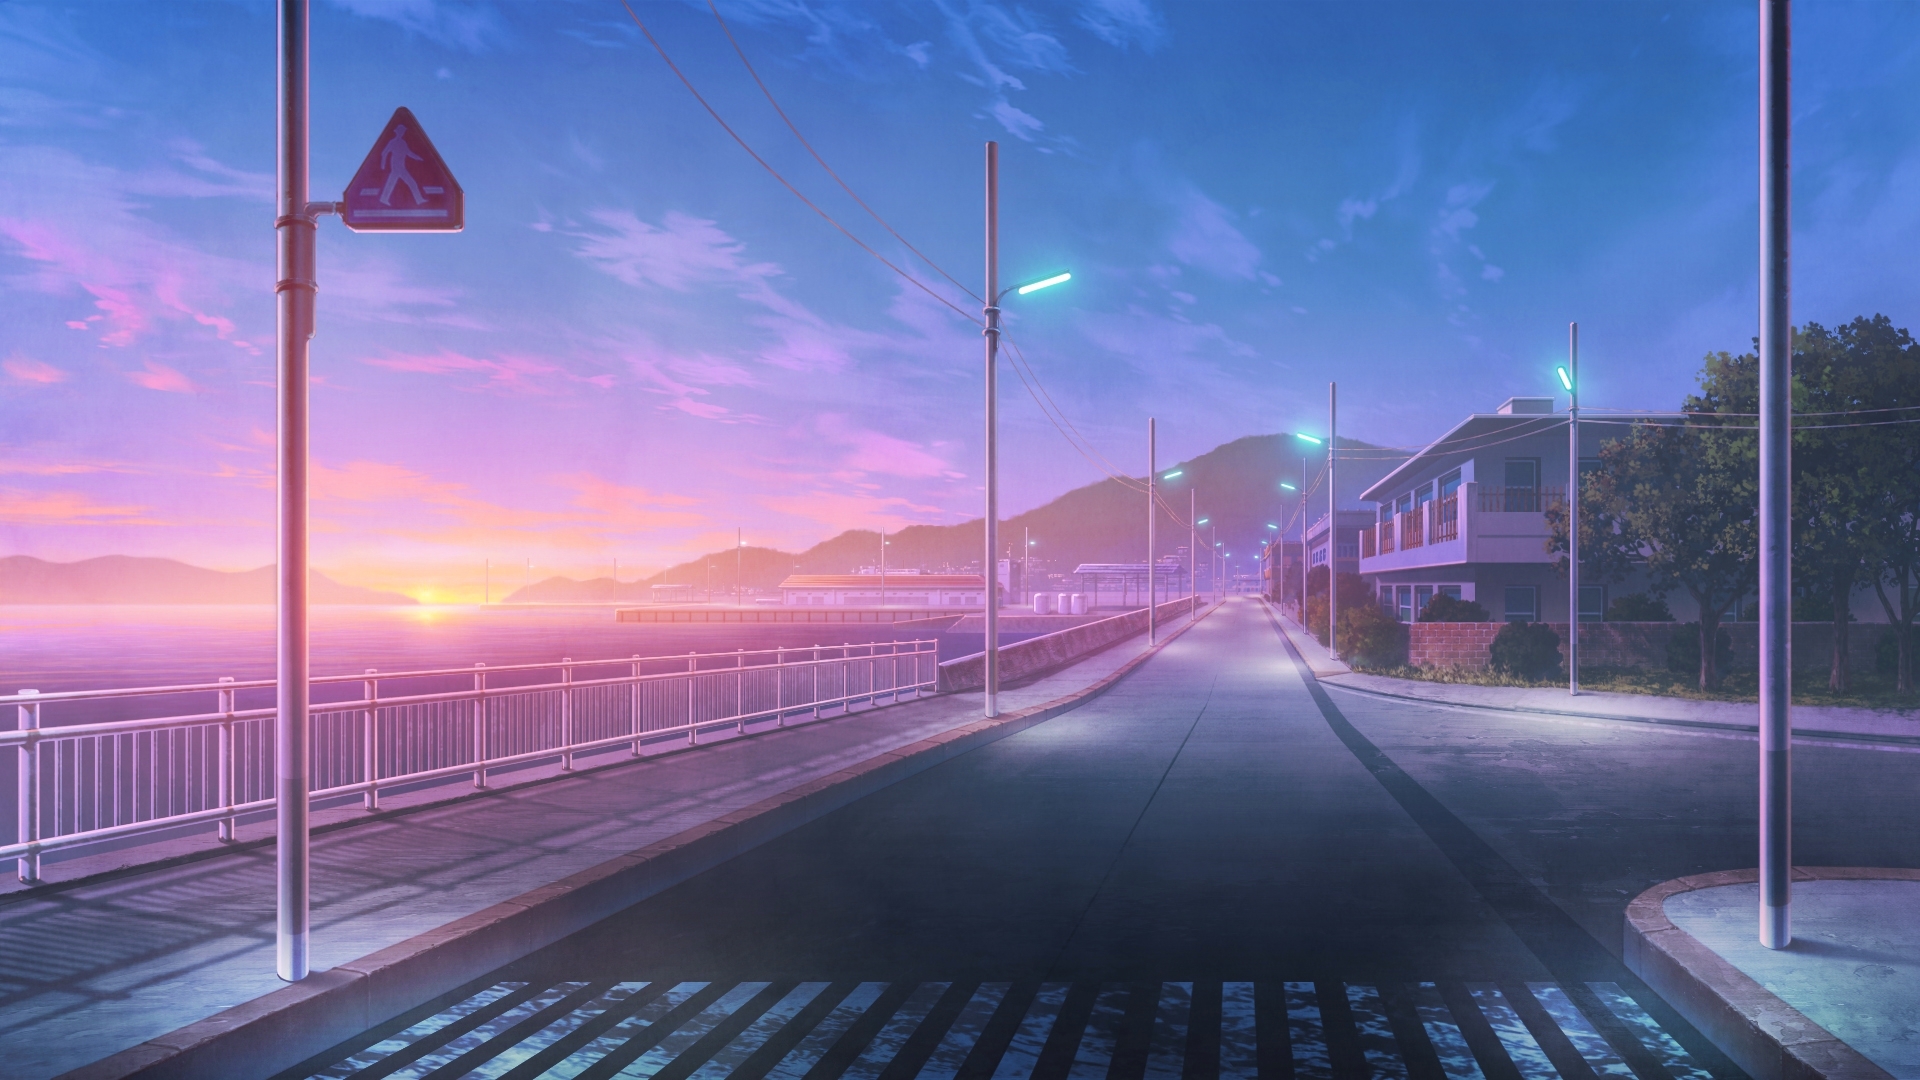 An anime style road with a stunning purple sunset on the horizon. by rkmlady